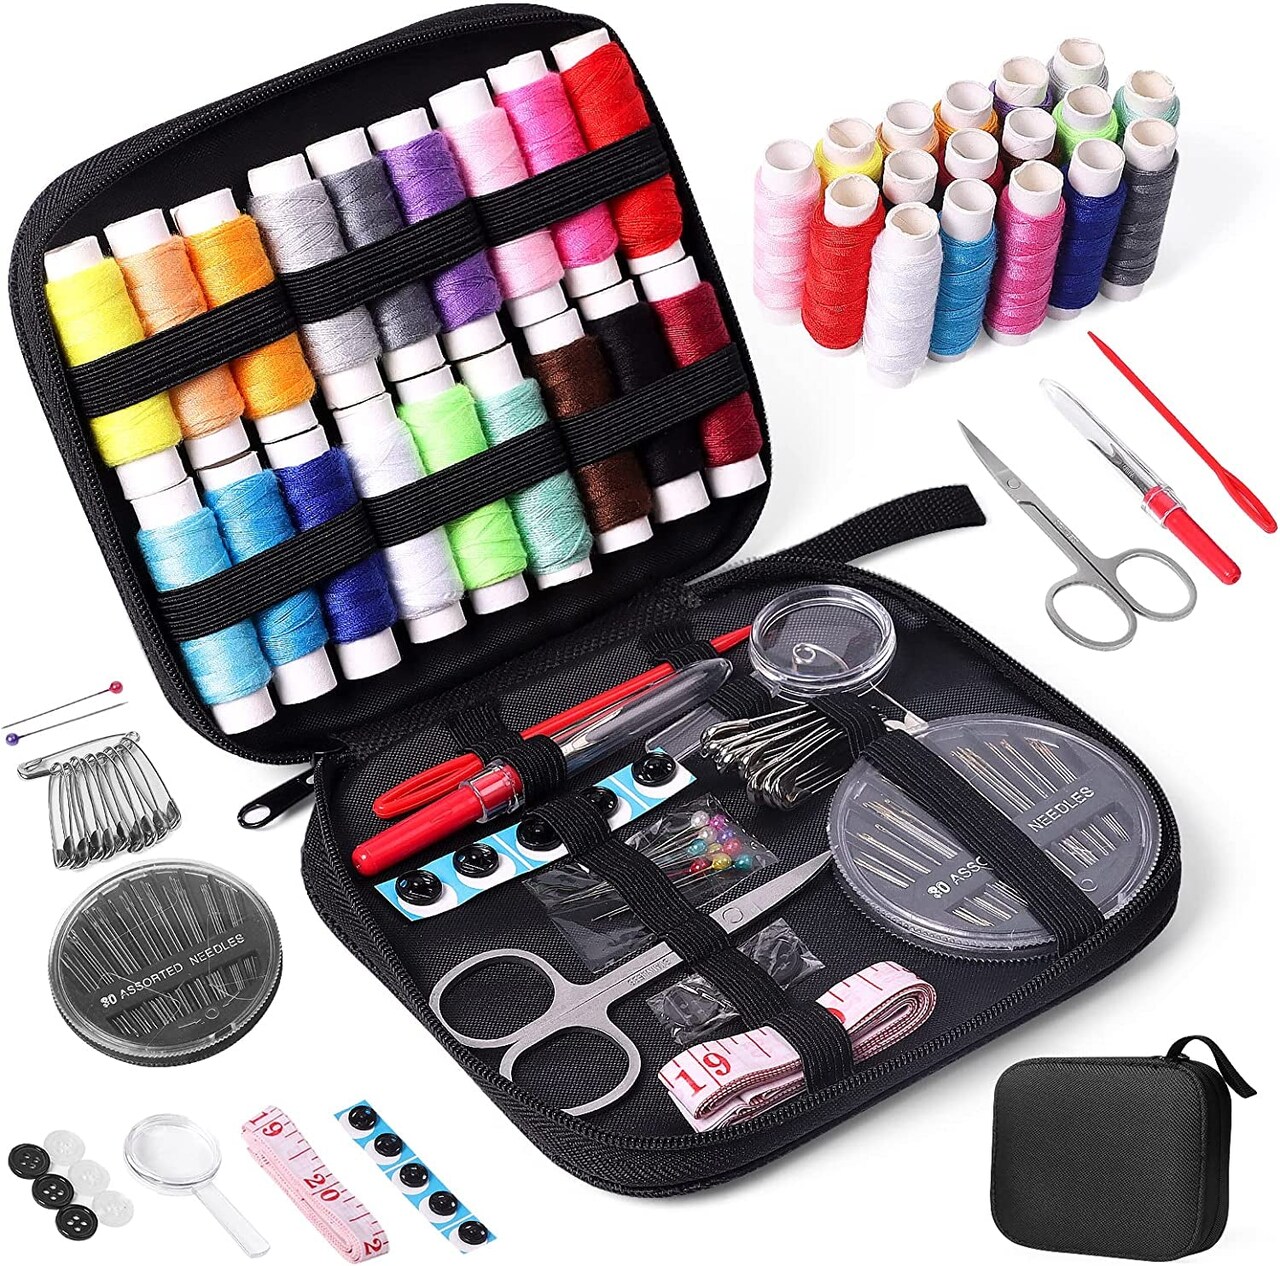 Sewing Kit with Case Portable Sewing Supplies for Home Traveler, Adults,  Beginner, Emergency, Kids Contains Thread, Scissors, Needles, Measure Etc